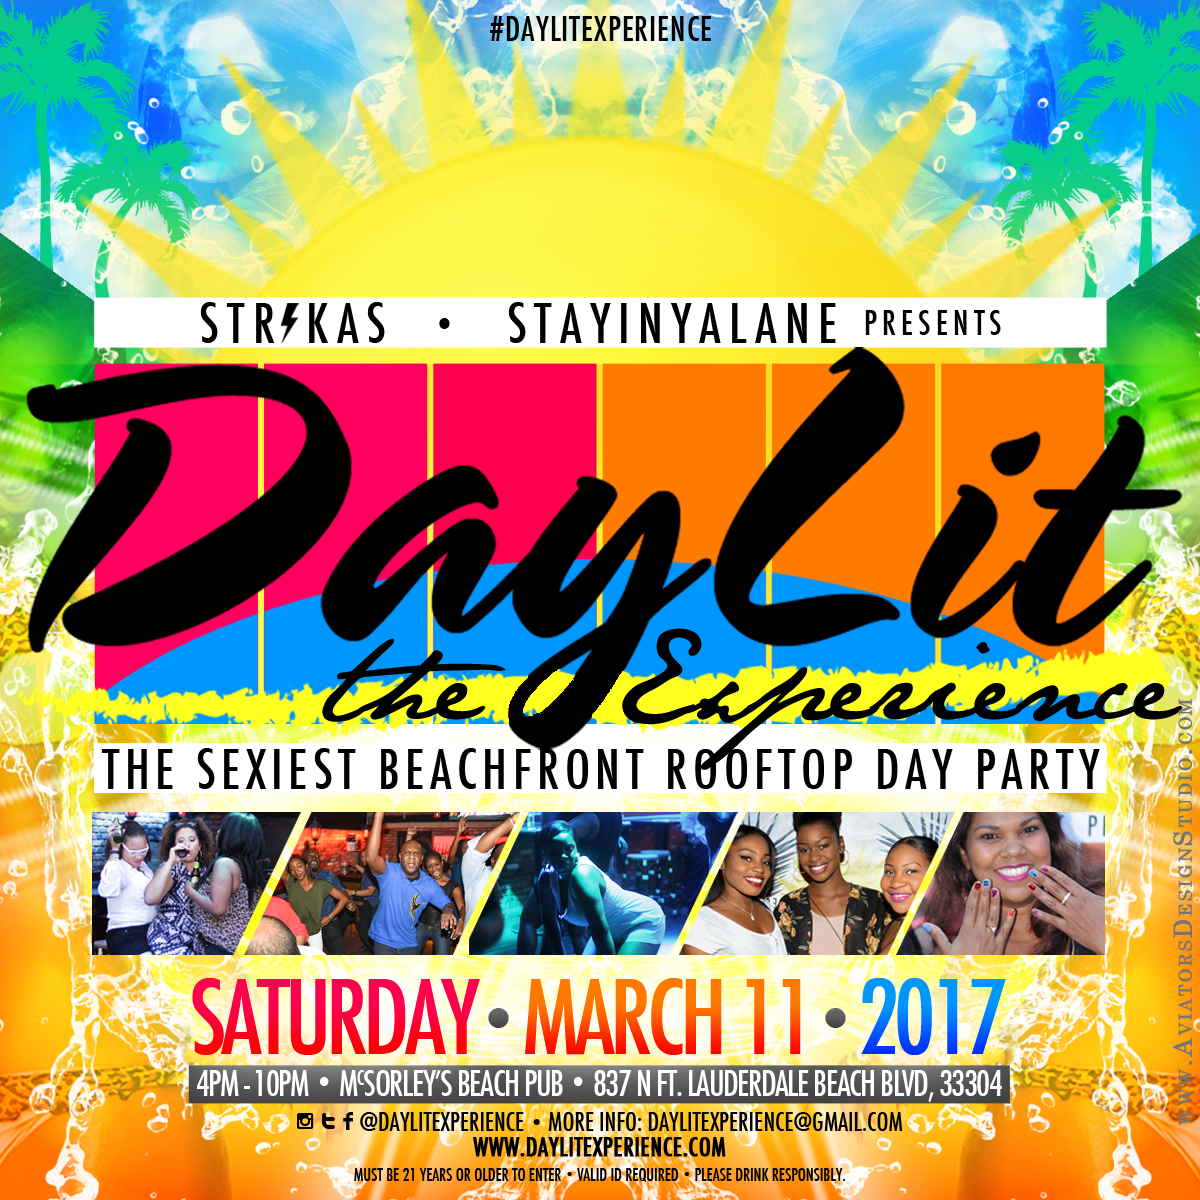 DayLit - The Experience - The Beachfront Rooftop Day Party with a View. Featuring Mr. Magnum, Your Girl's Favourite DJ.